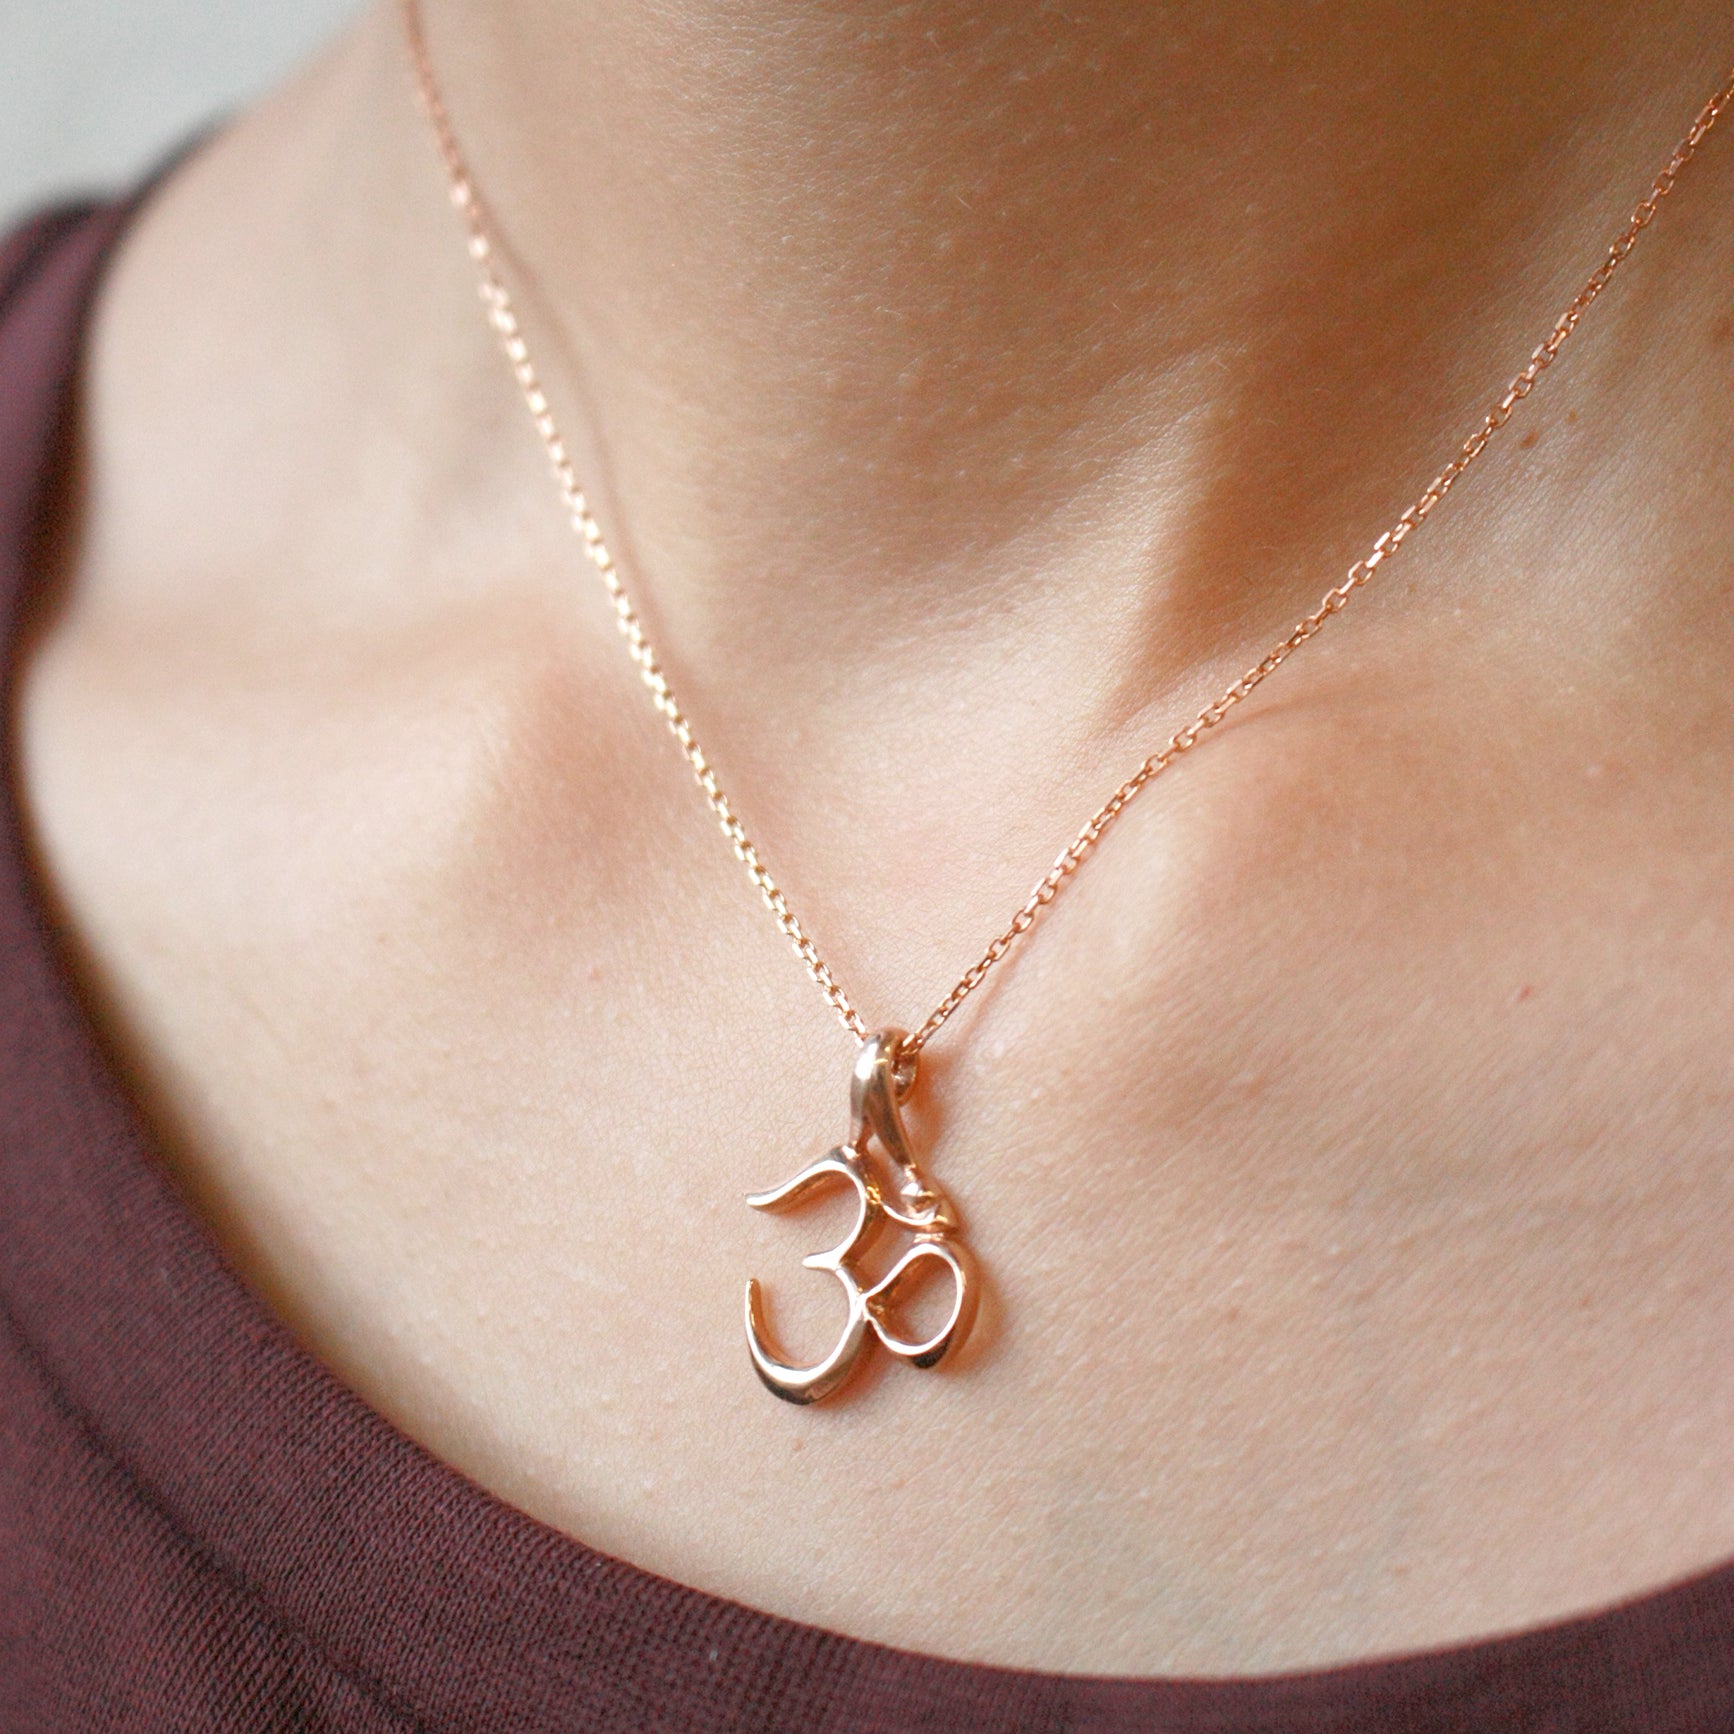 om necklace yoga jewelry rose gold